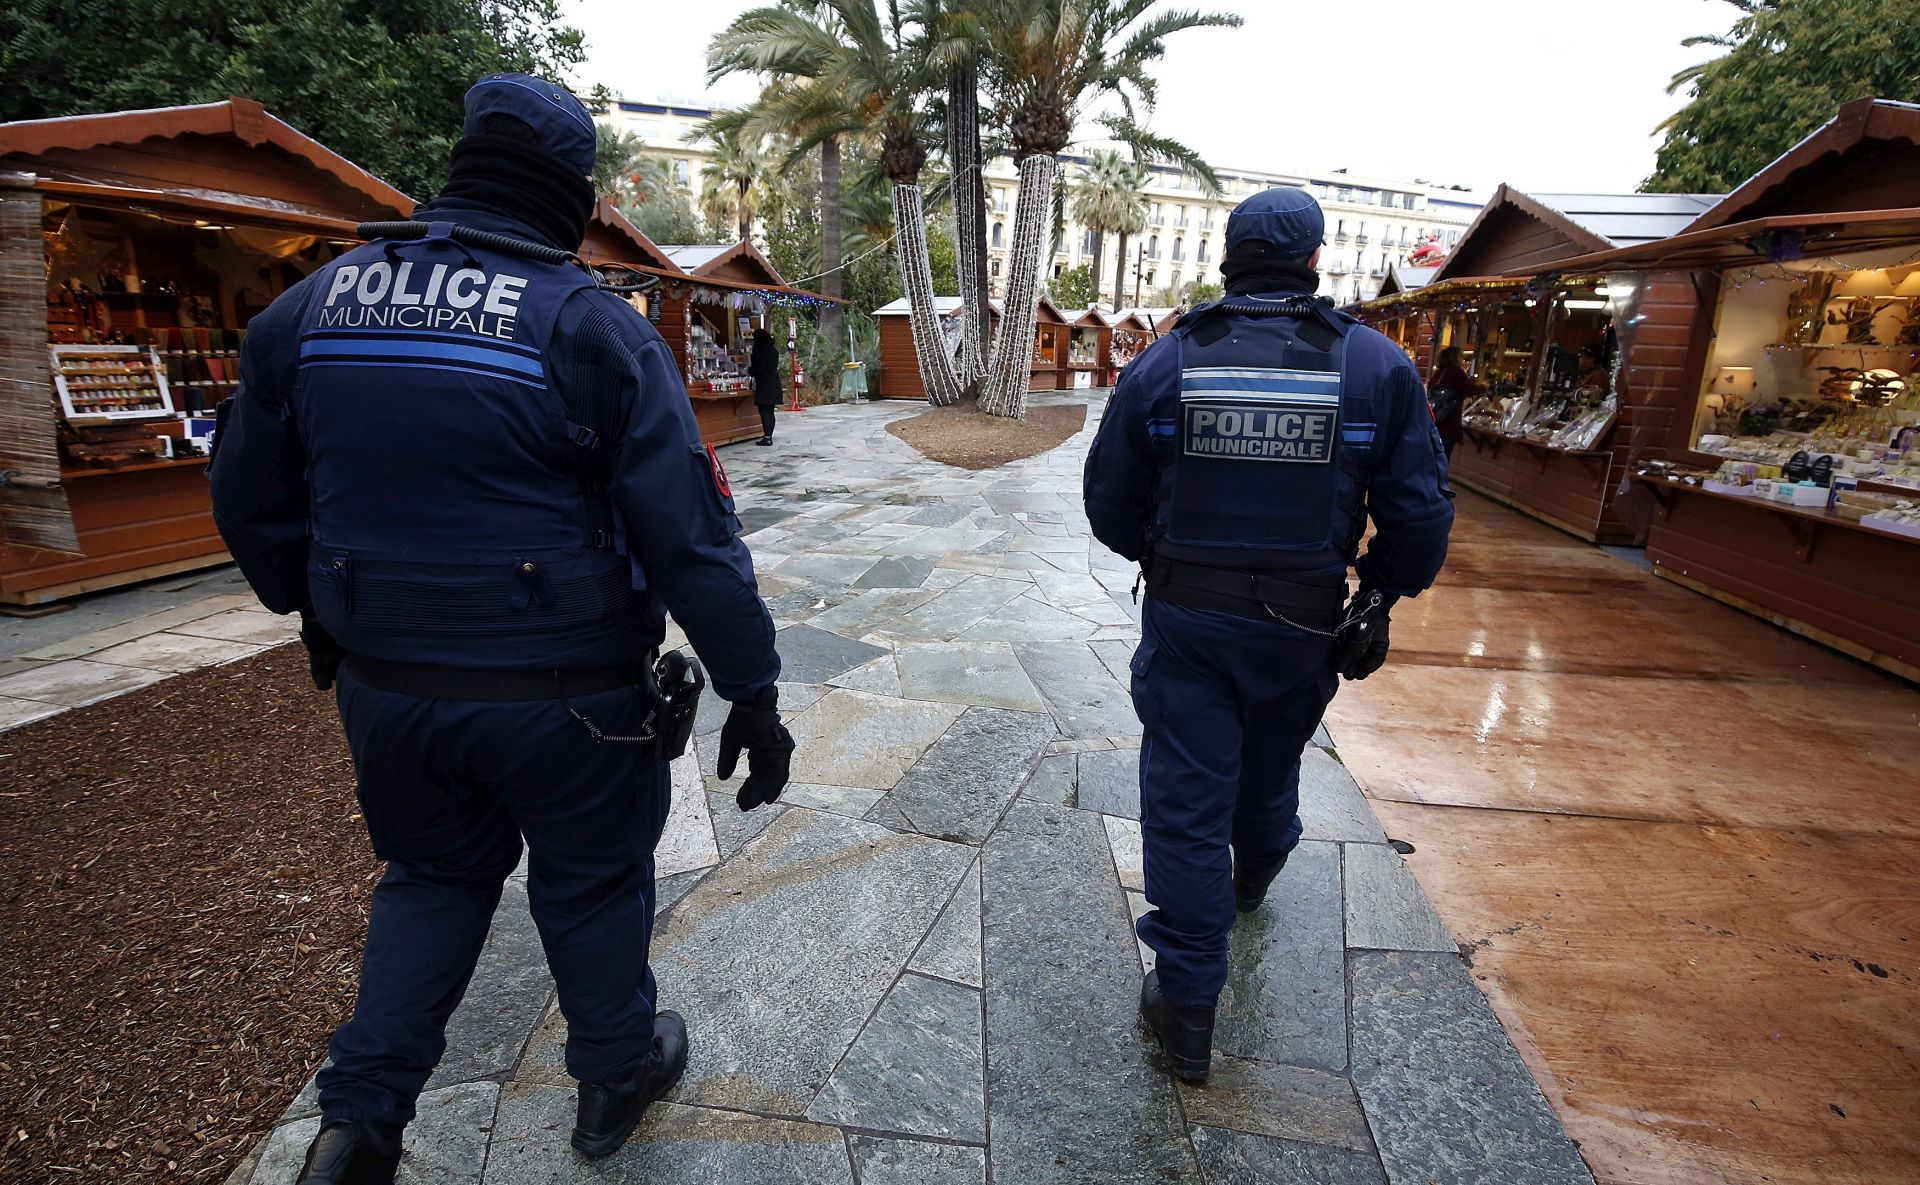 epa05683292 French police officers patrol a Christmas market in Nice, France, 20 December 2016. Police are stepping up security measures at markets in France after 12 people were killed and at least 48 injured when a truck ploughed into a busy Christmas market in Berlin, Germany, 19 December. Authorities are investigating the incident as a 'possible terrorist attack'.  EPA/SEBASTIEN NOGIER